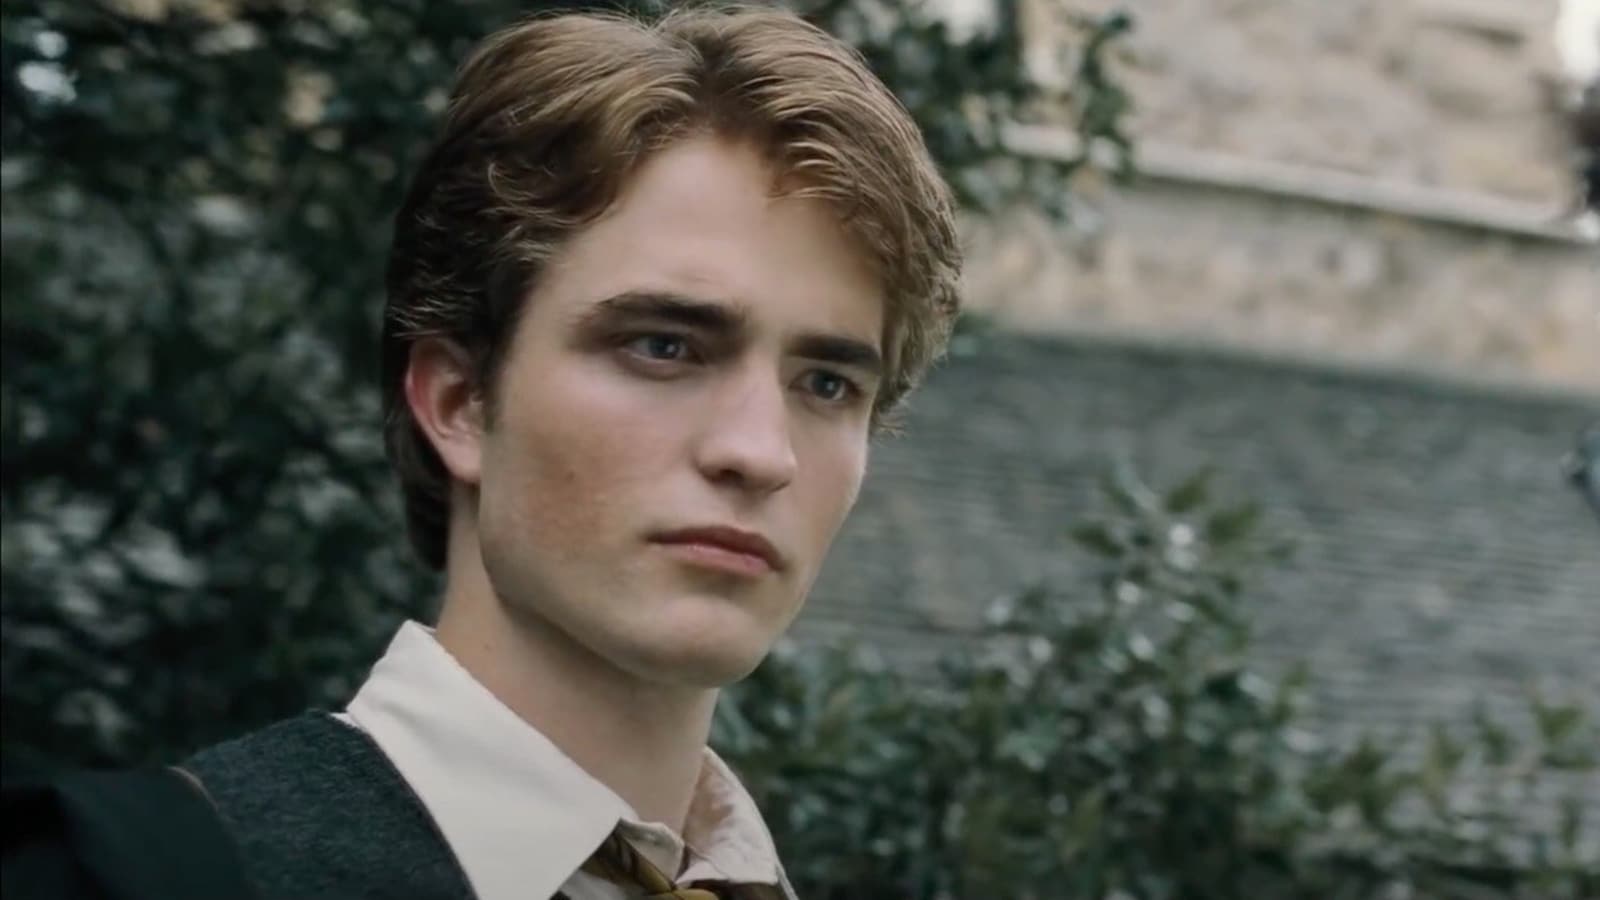 What actor played Cedric Diggory in the Harry Potter series?